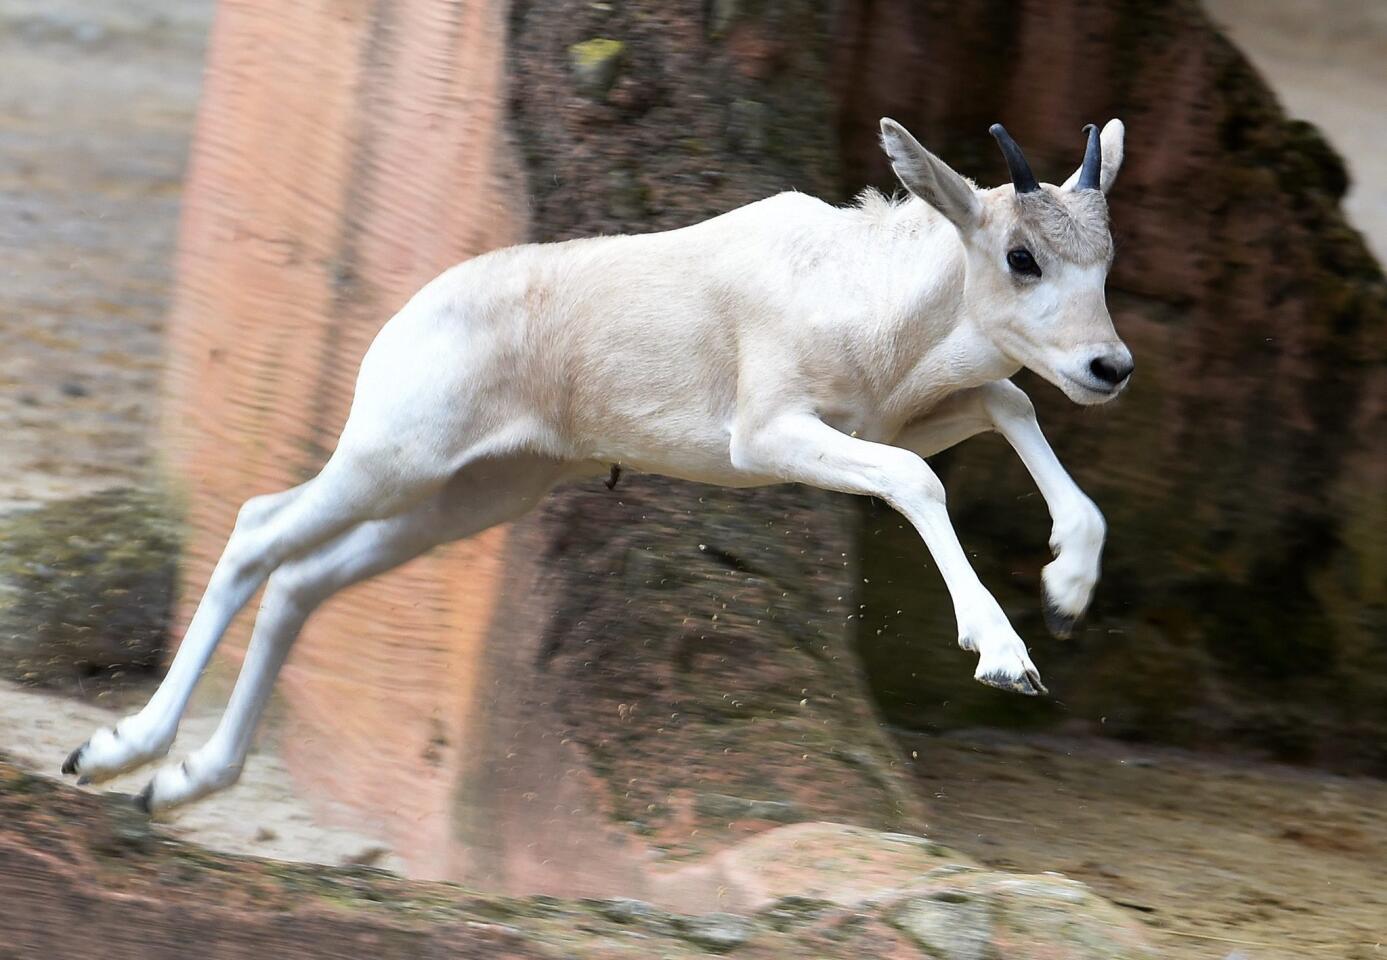 A young white Addax desert antelope jumps around the outdoor enclosure at the zoo in Hannover, Germany, on June 30, 2016. Two baby antelopes were born in the zoo in mid-May. In their African home region, the Addax are critically endangered.